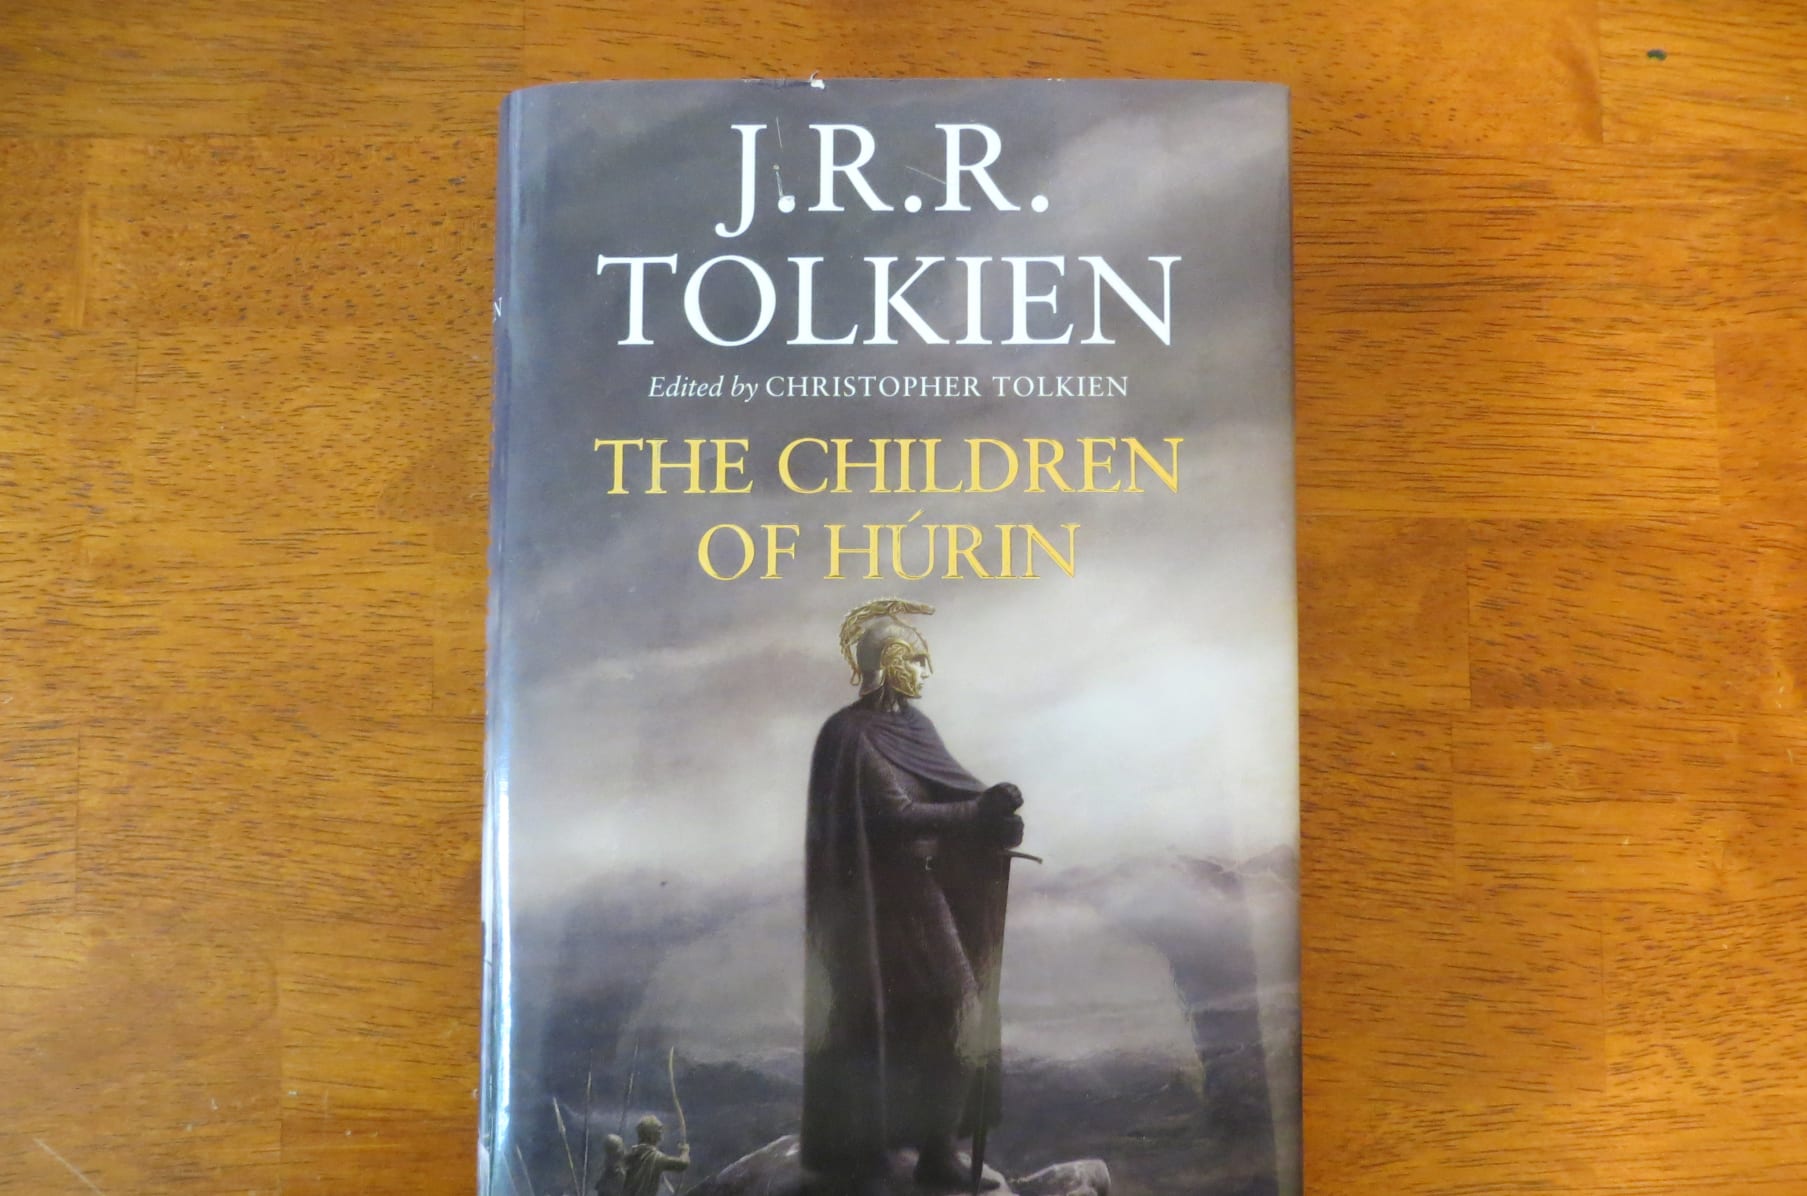 Creative projects - The Children of Húrin